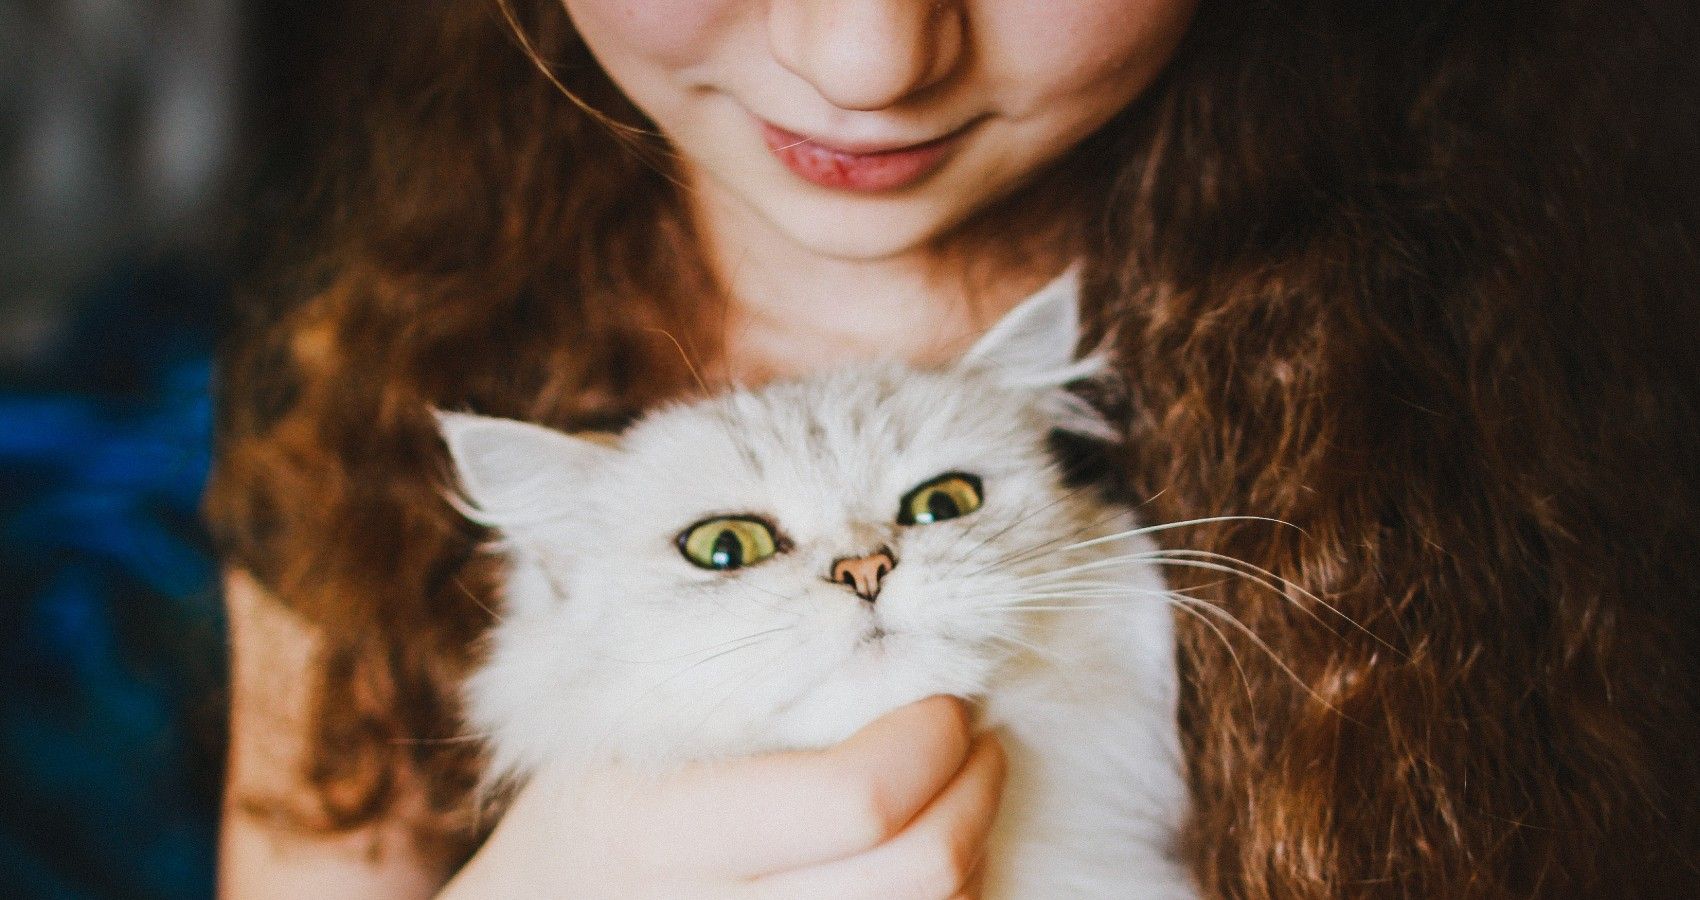 A child holding on to a white cat